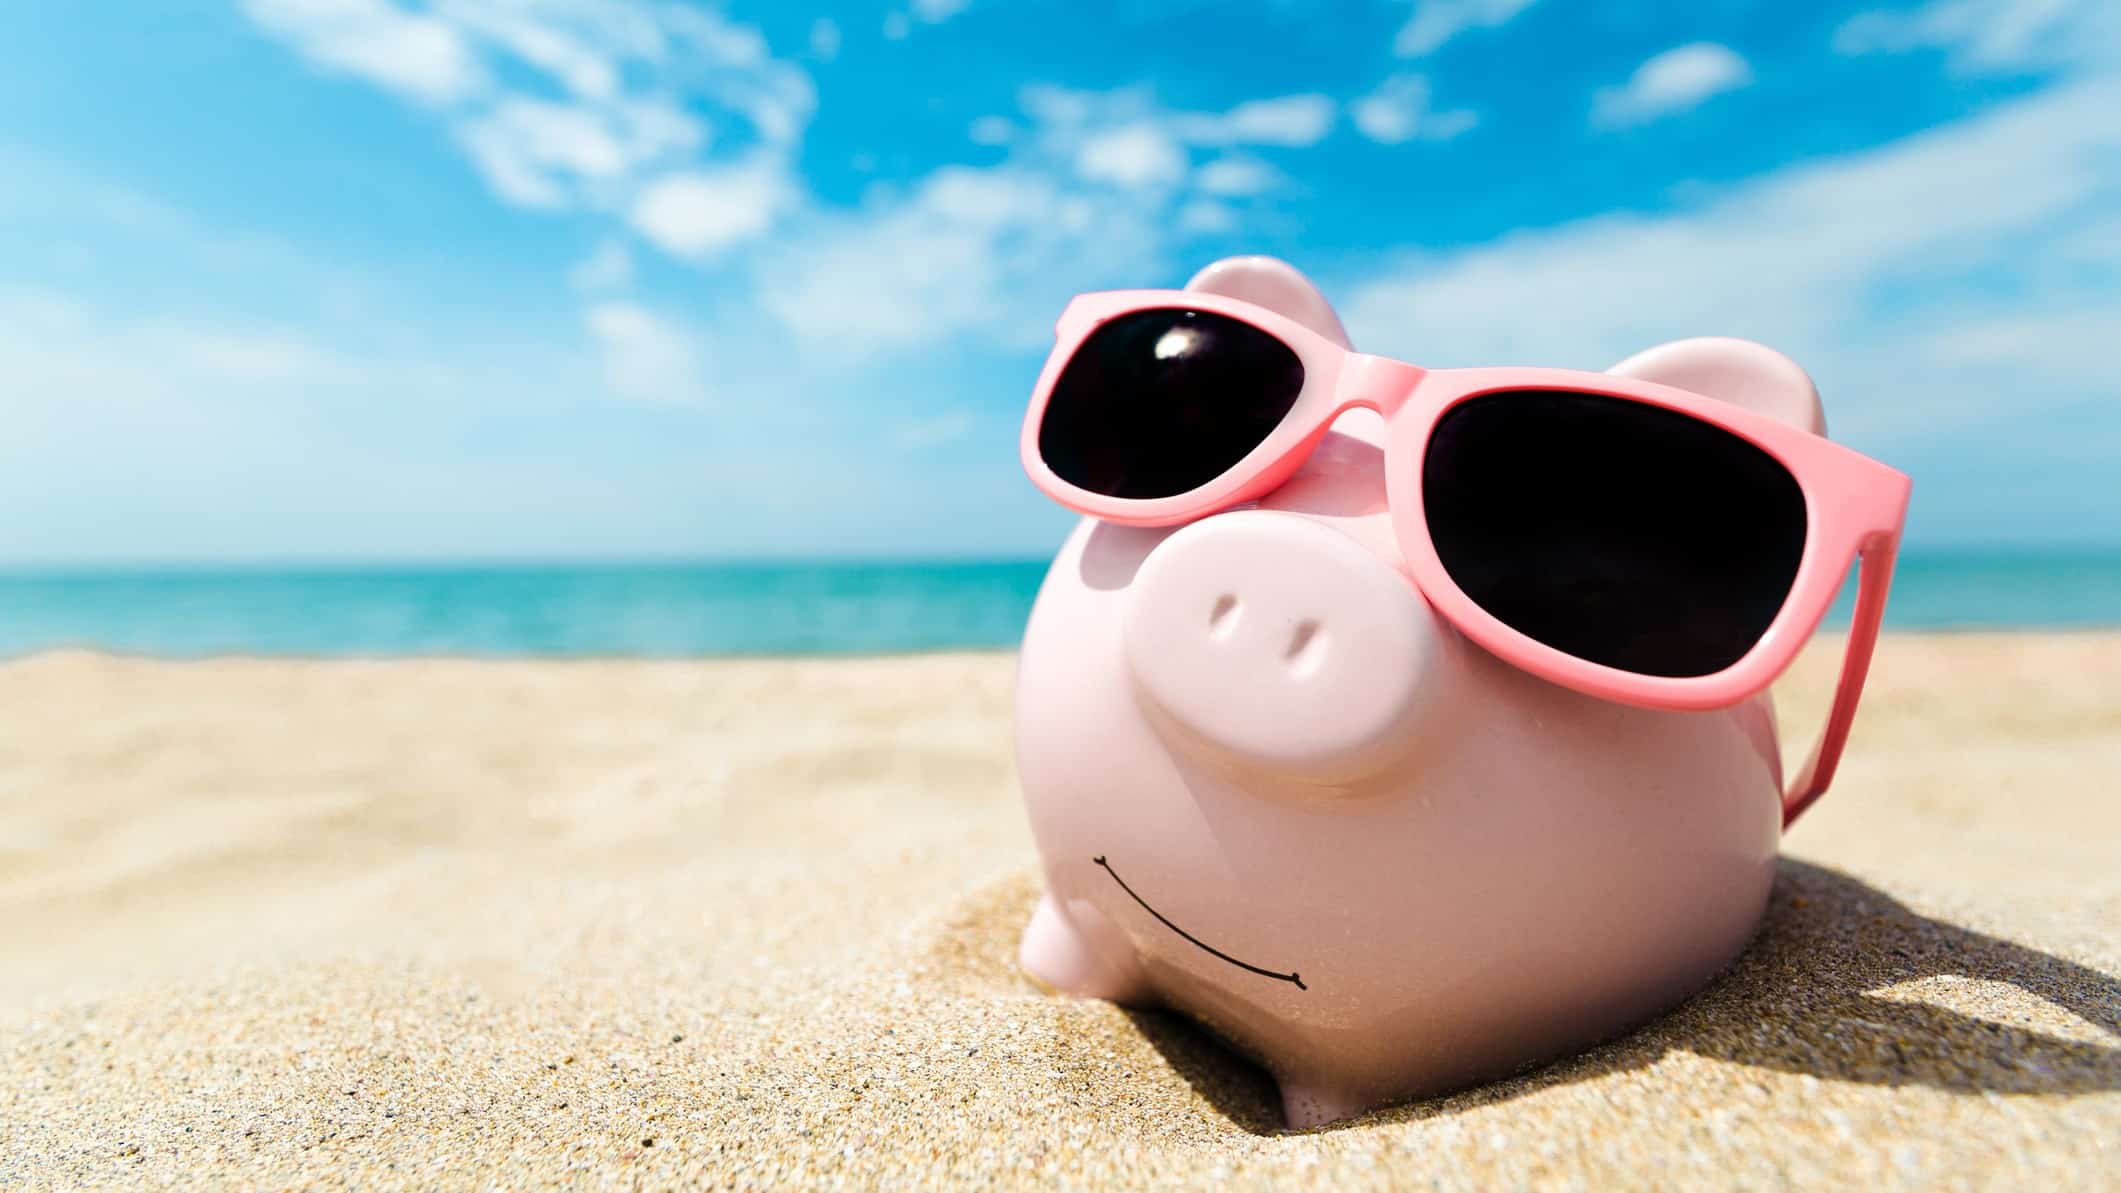 top asx shares to buy in summer or to retire represented by piggy bank on sunny beach